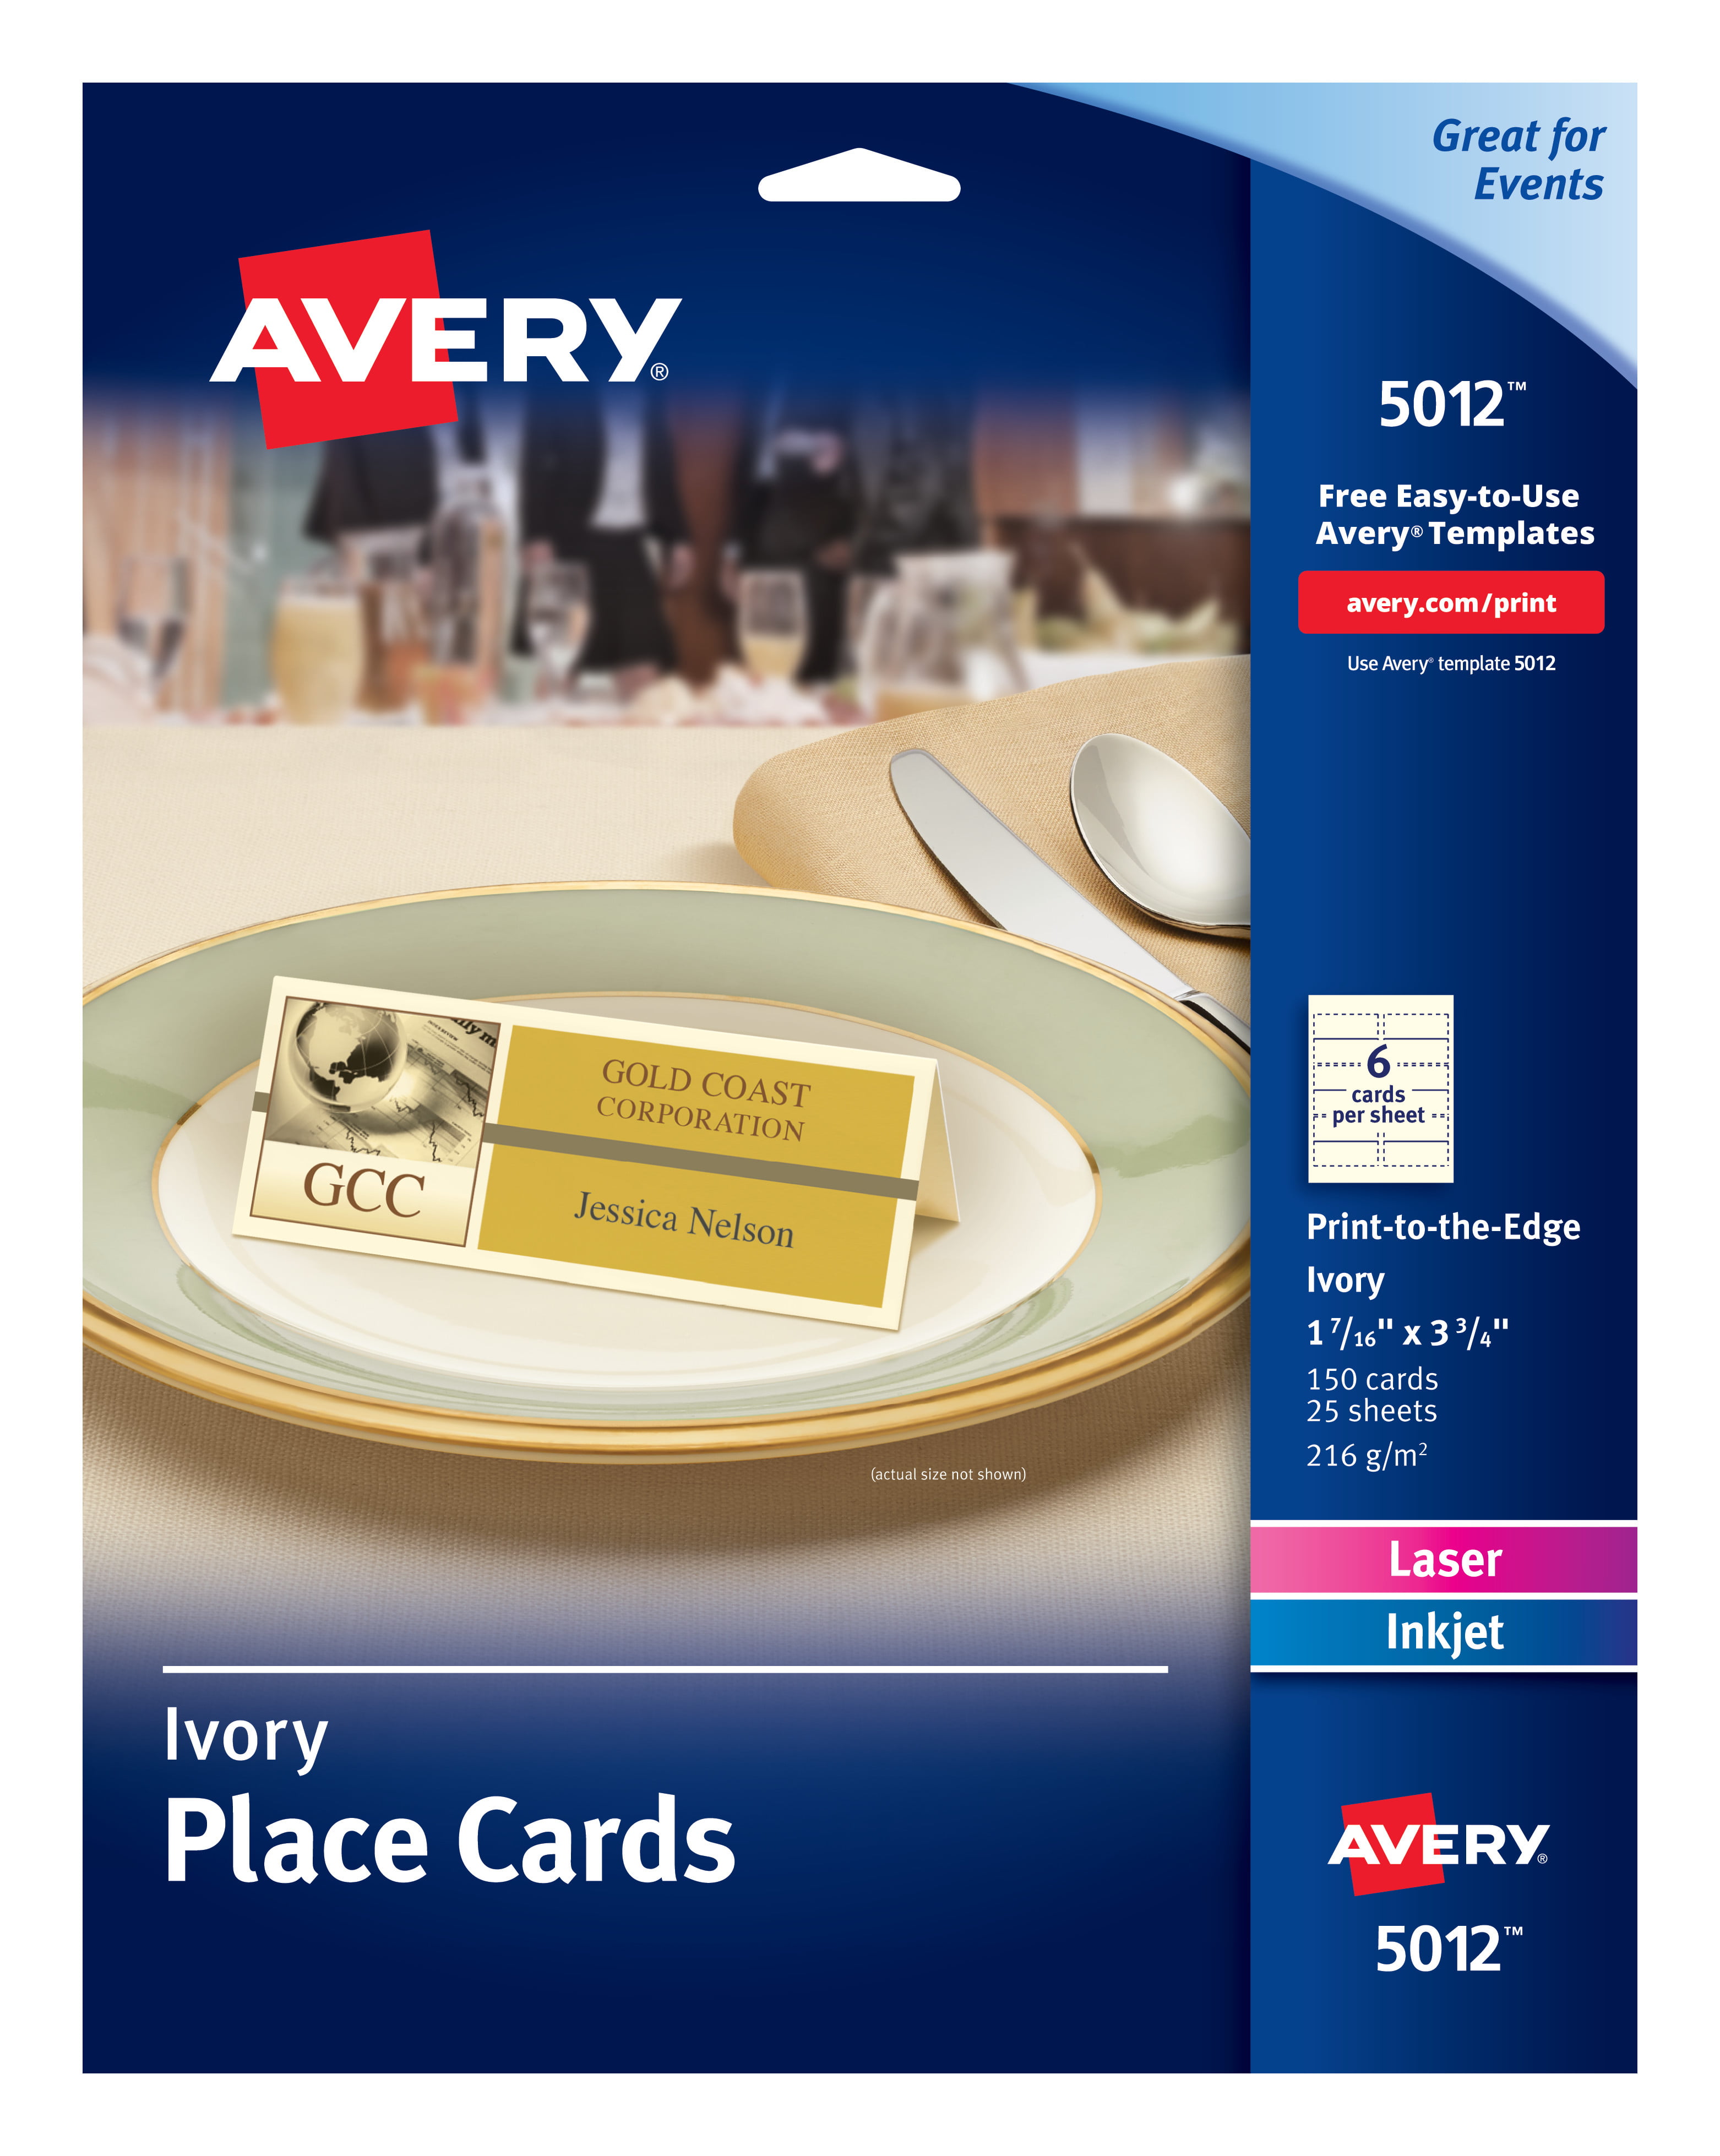 avery-ivory-place-cards-two-sided-printing-1-7-16-x-3-3-4-150